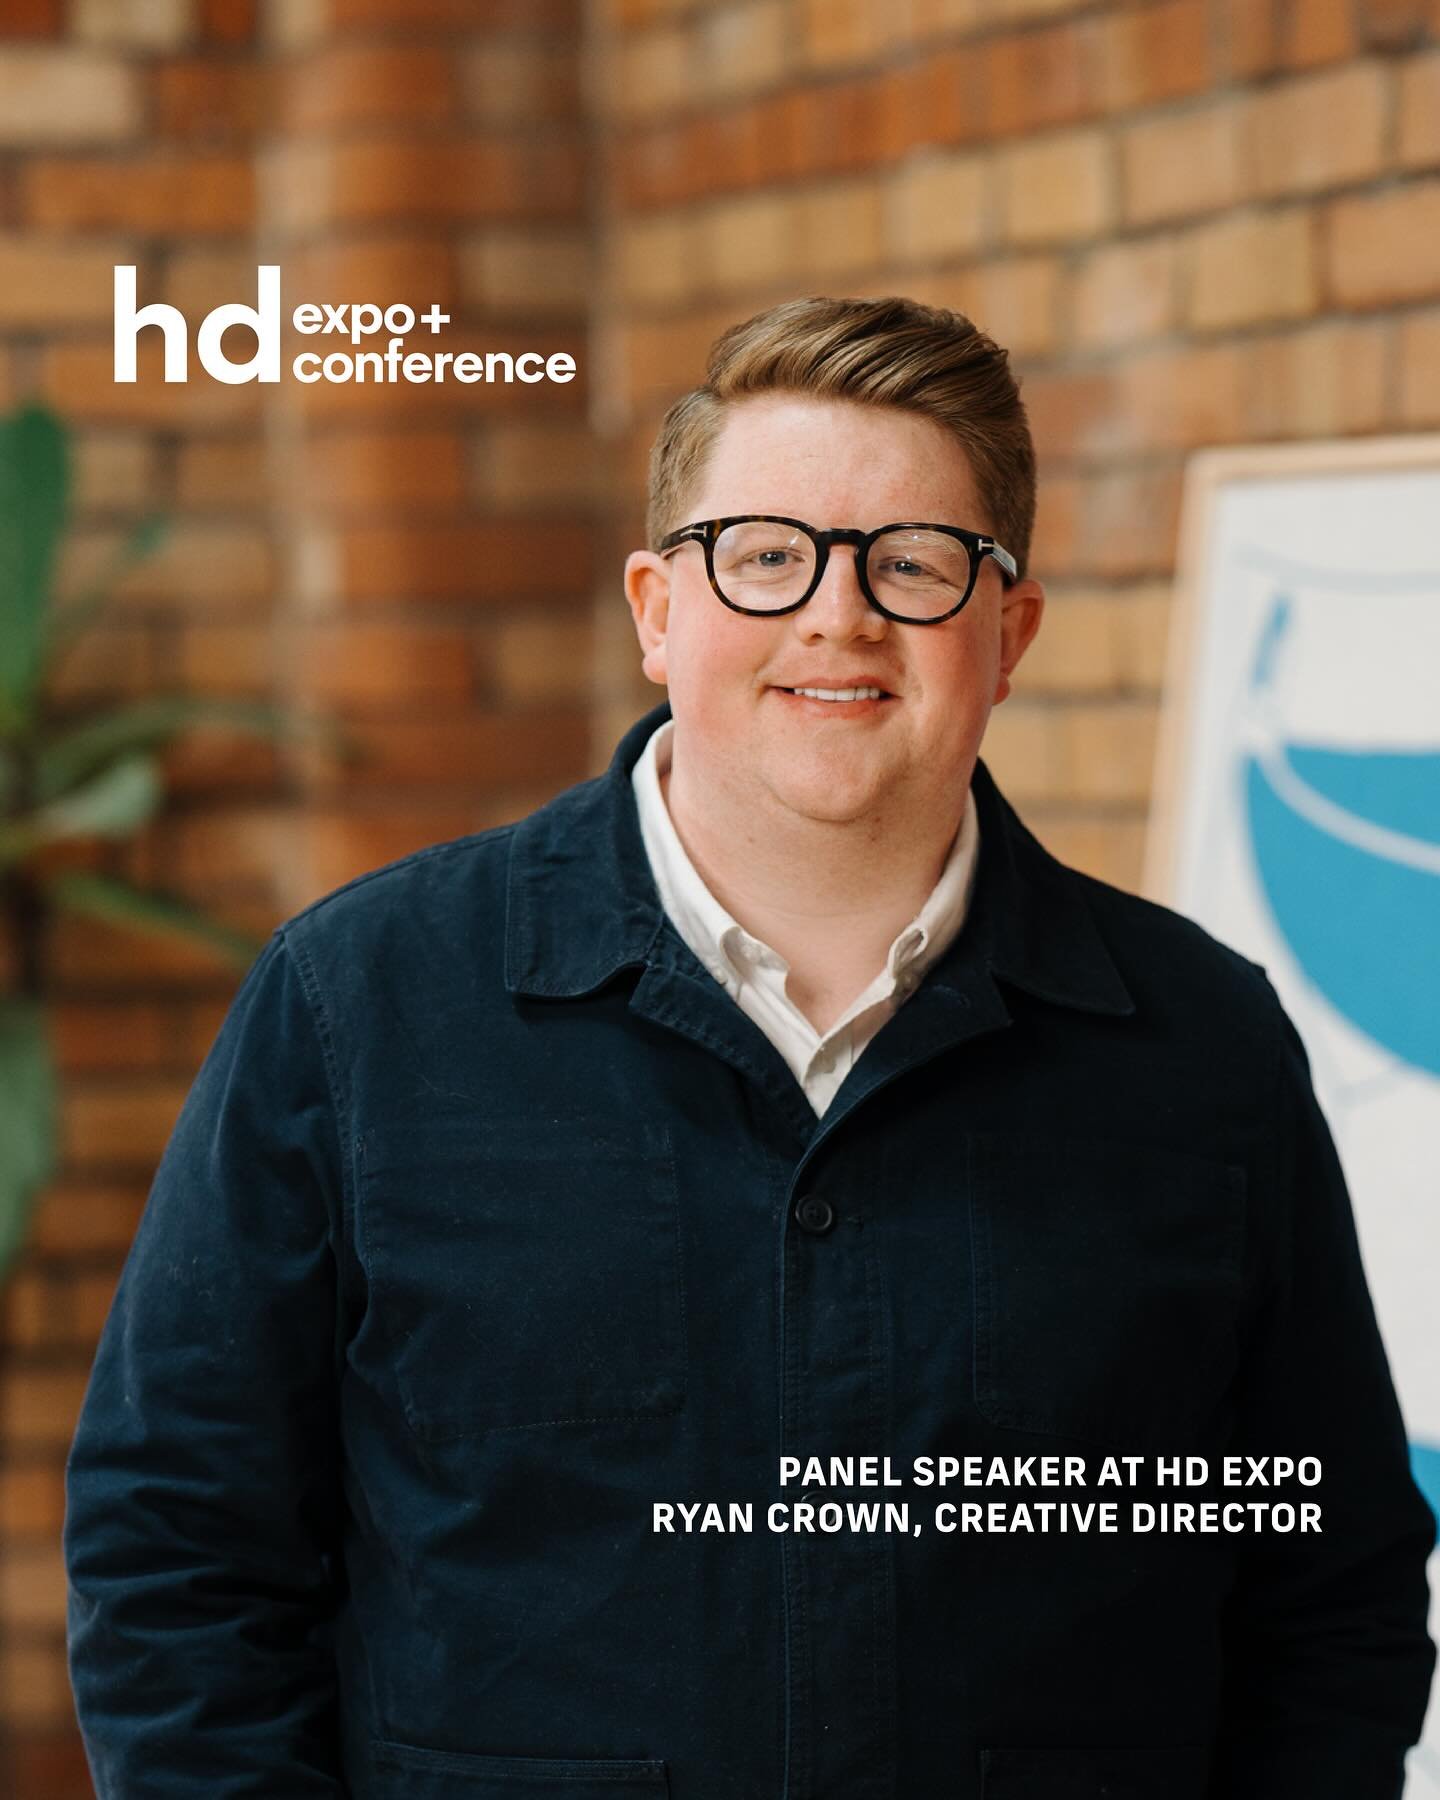 Next week our Creative Director, Ryan Crown, will be in Las Vegas at @hospitalitydesign Expo discussing 'The Special Sauce: What Does Authentic Design Mean Today?&rsquo; alongside Kat Kim, Andrew Connorton, Leigh Salem, and Roy Kim.